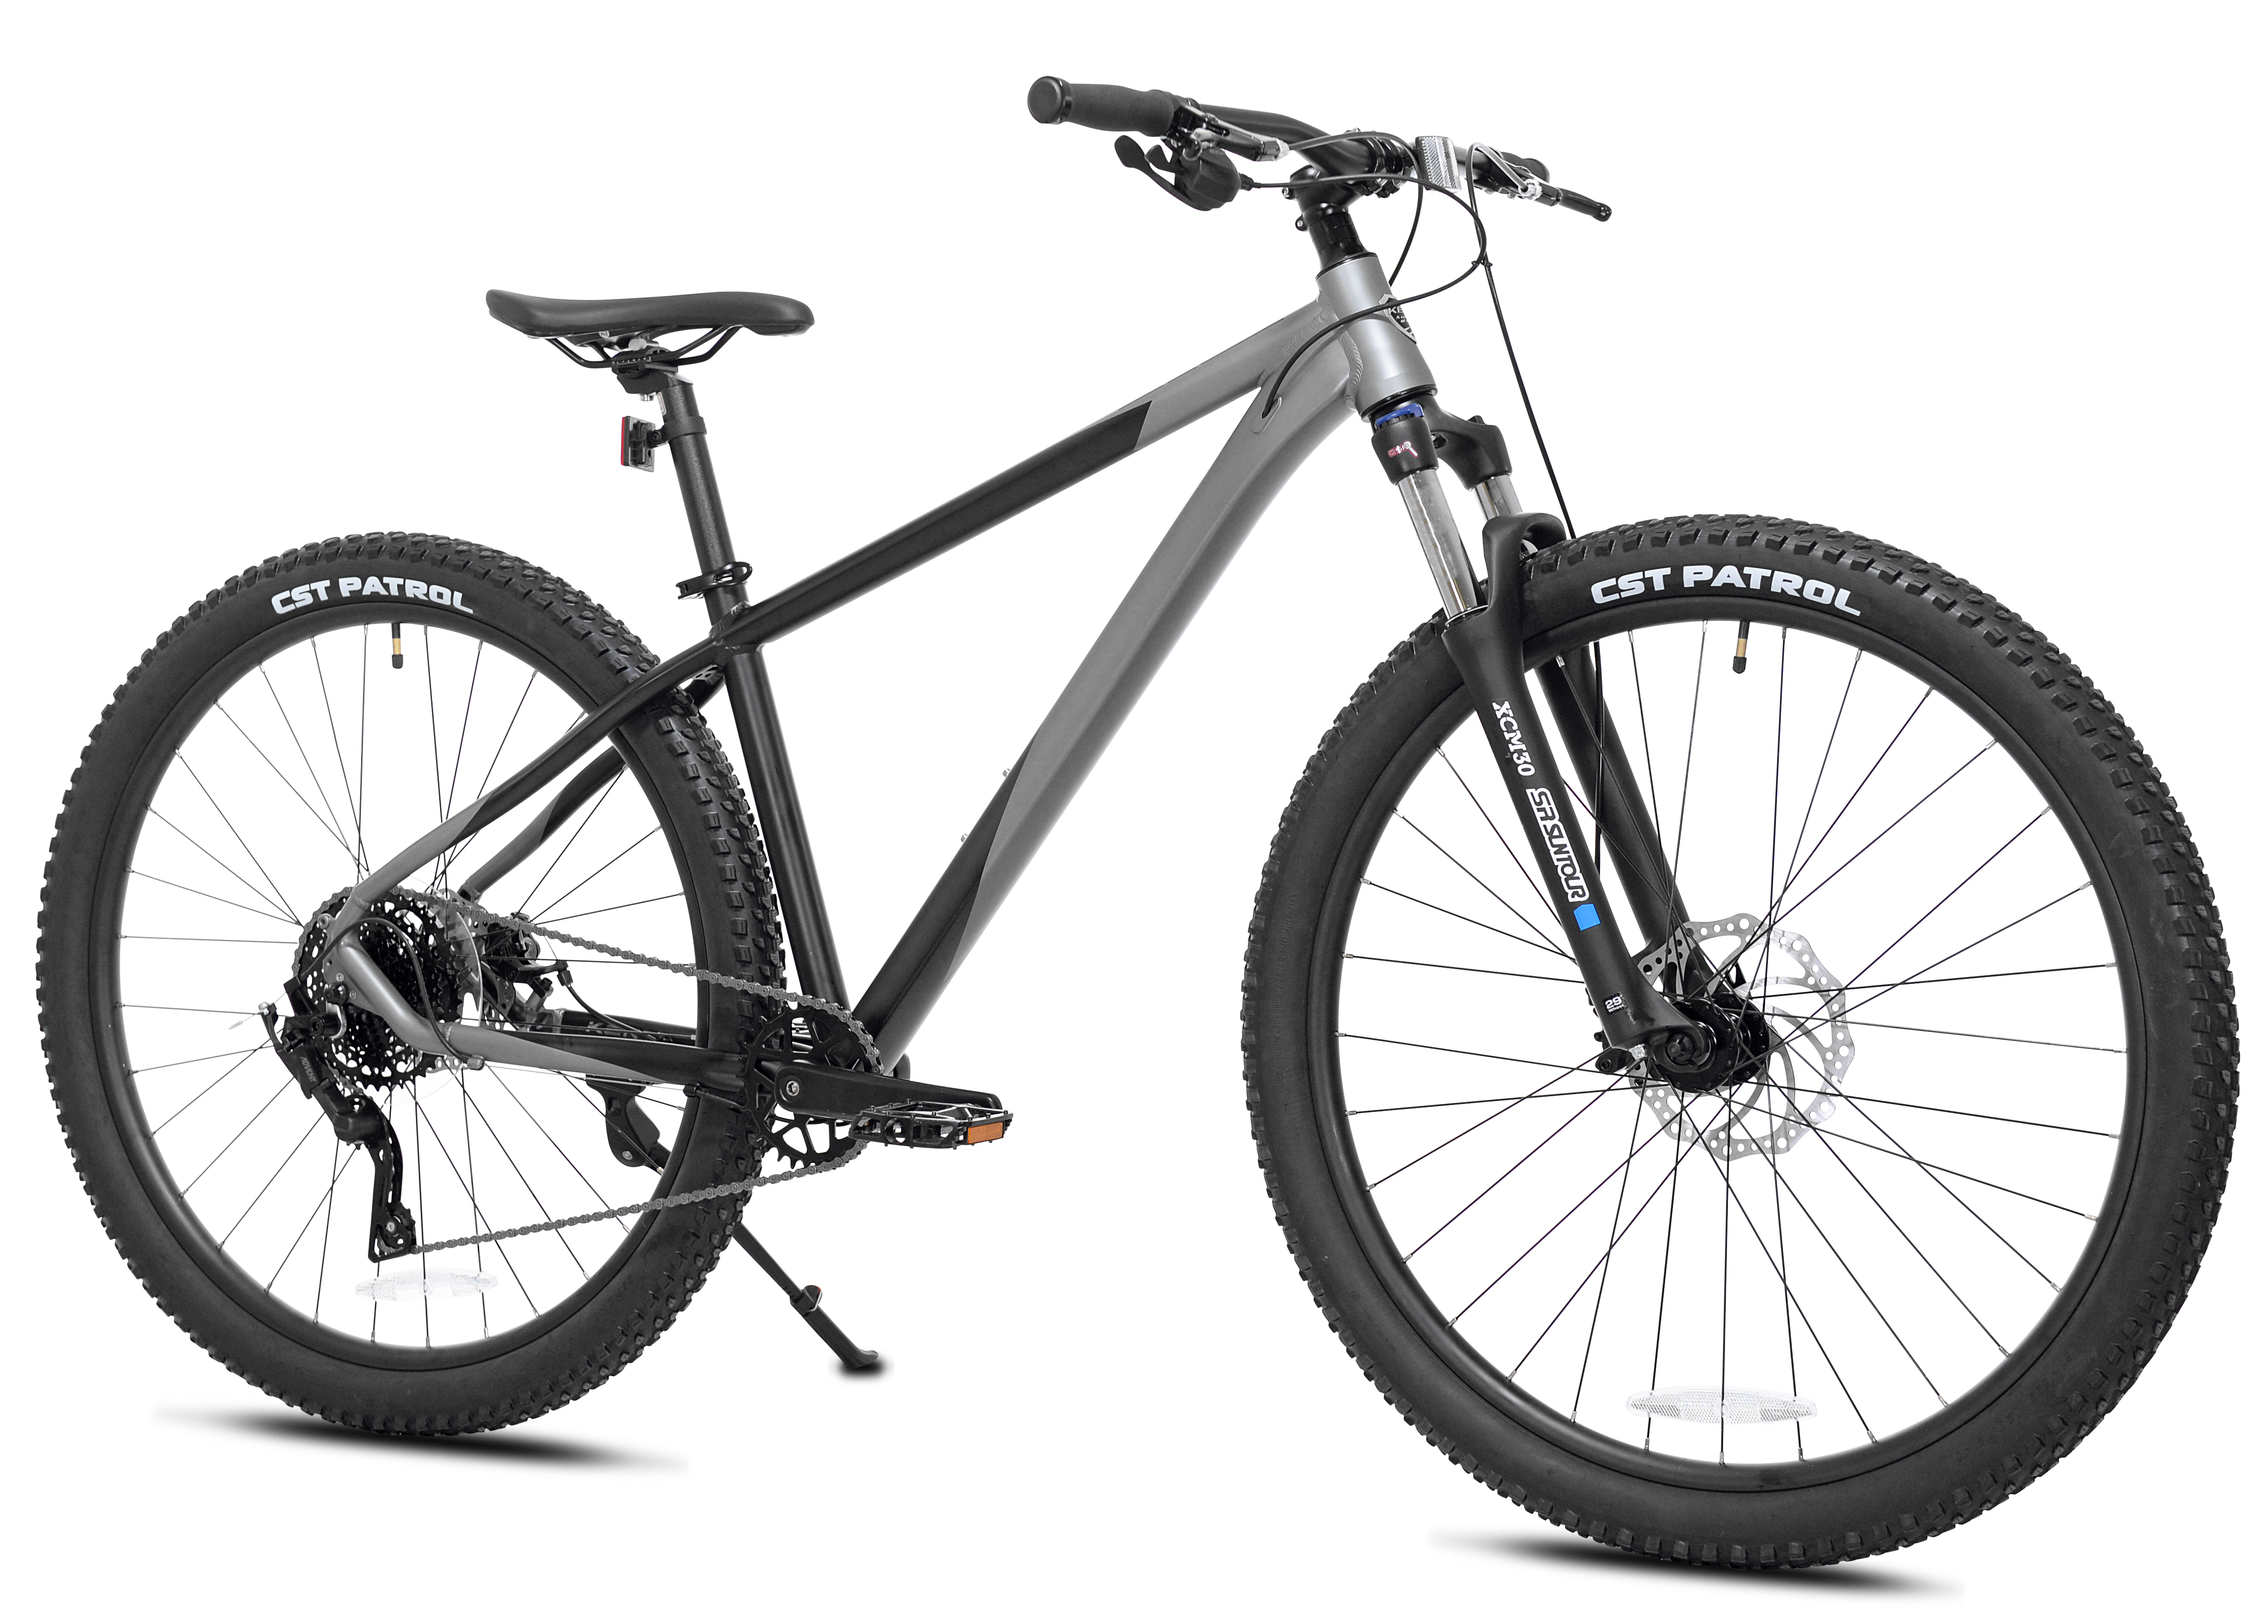 Kent Bicycles 29" Men's Trouvaille Mountain Bike Medium, Black and Taupe - image 2 of 11